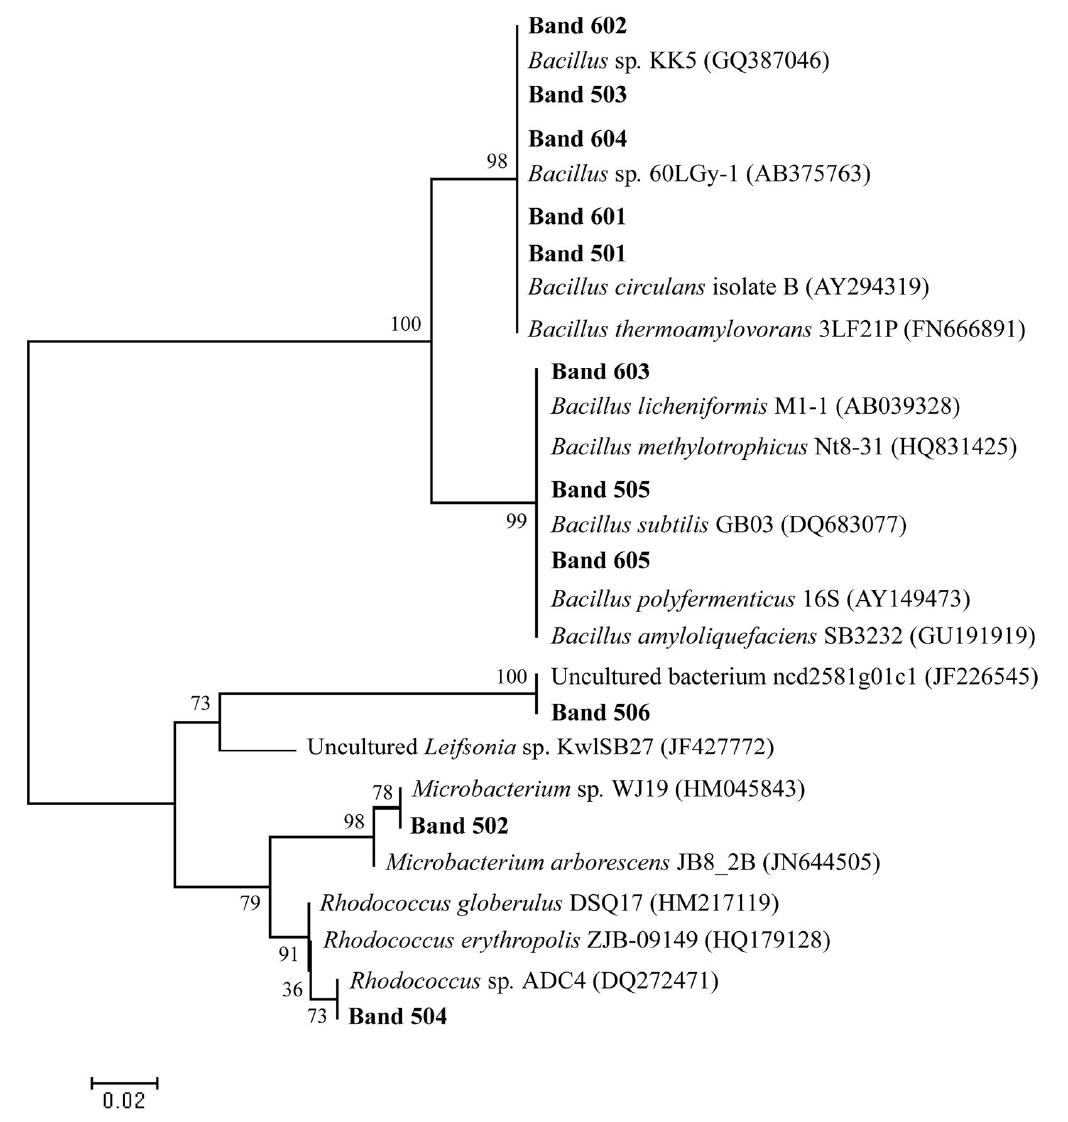 Phylogenetic tree of 16S rDNA gene sequences from bands in the denaturing gradient gel electrophoresis profile of Kimjeomrae samples.